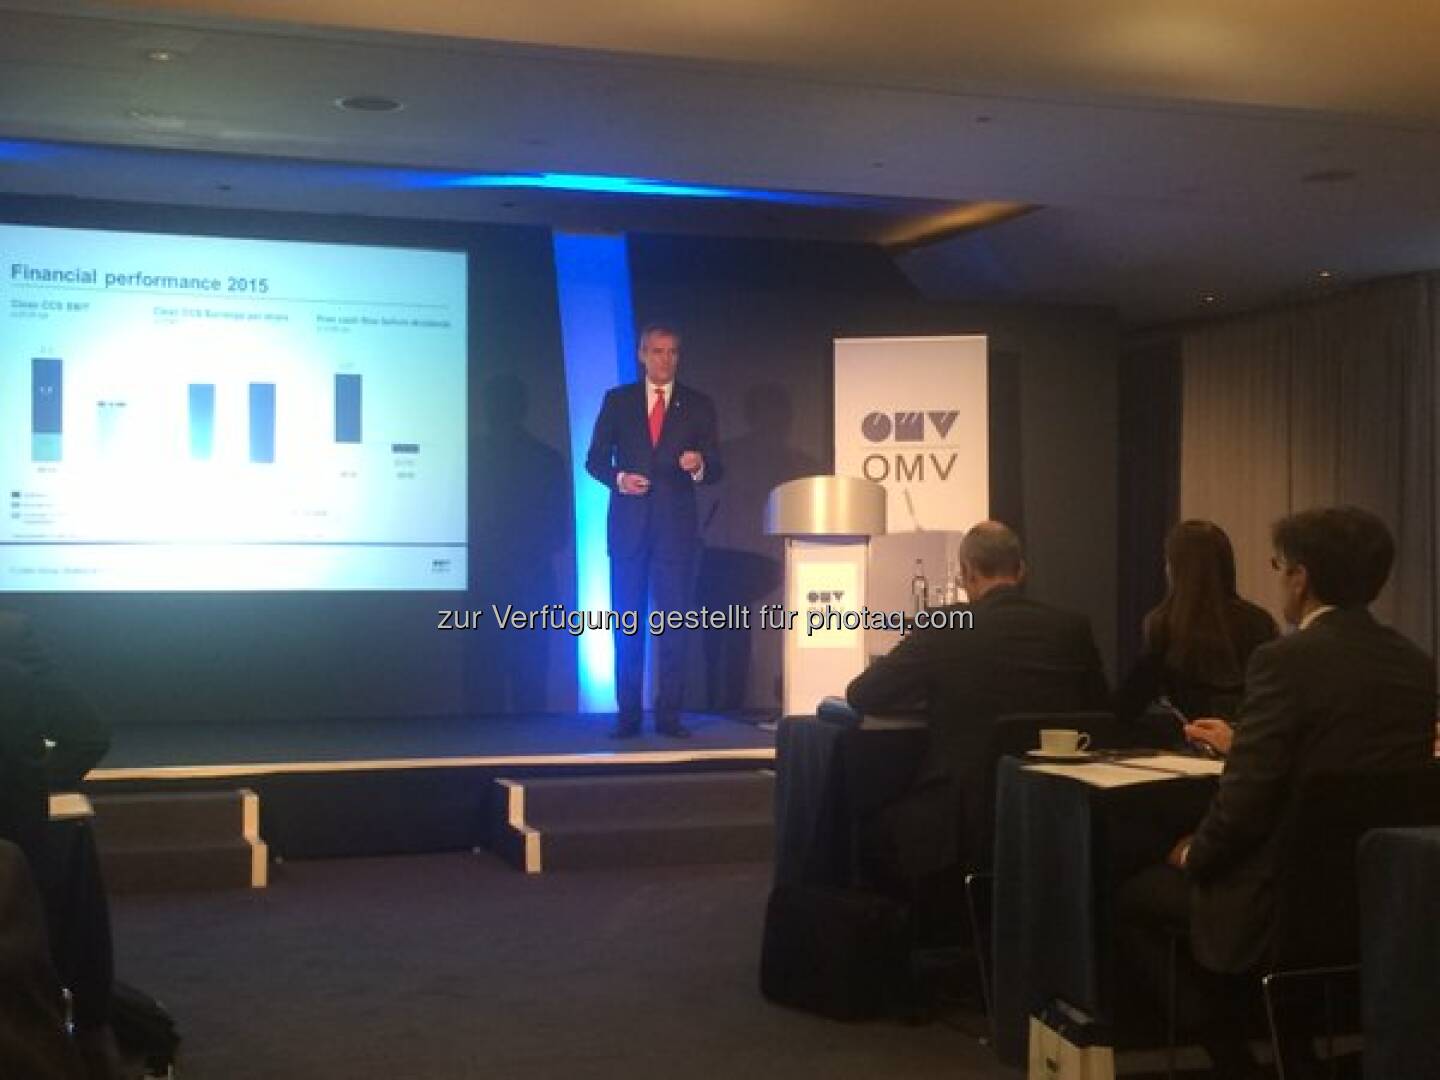 CEO Rainer Seele is opening the #OMV strategy and 2015 results presentation. #omvresults http://twitter.com/omv/status/700267858354372608/photo/1  Source: http://facebook.com/omv